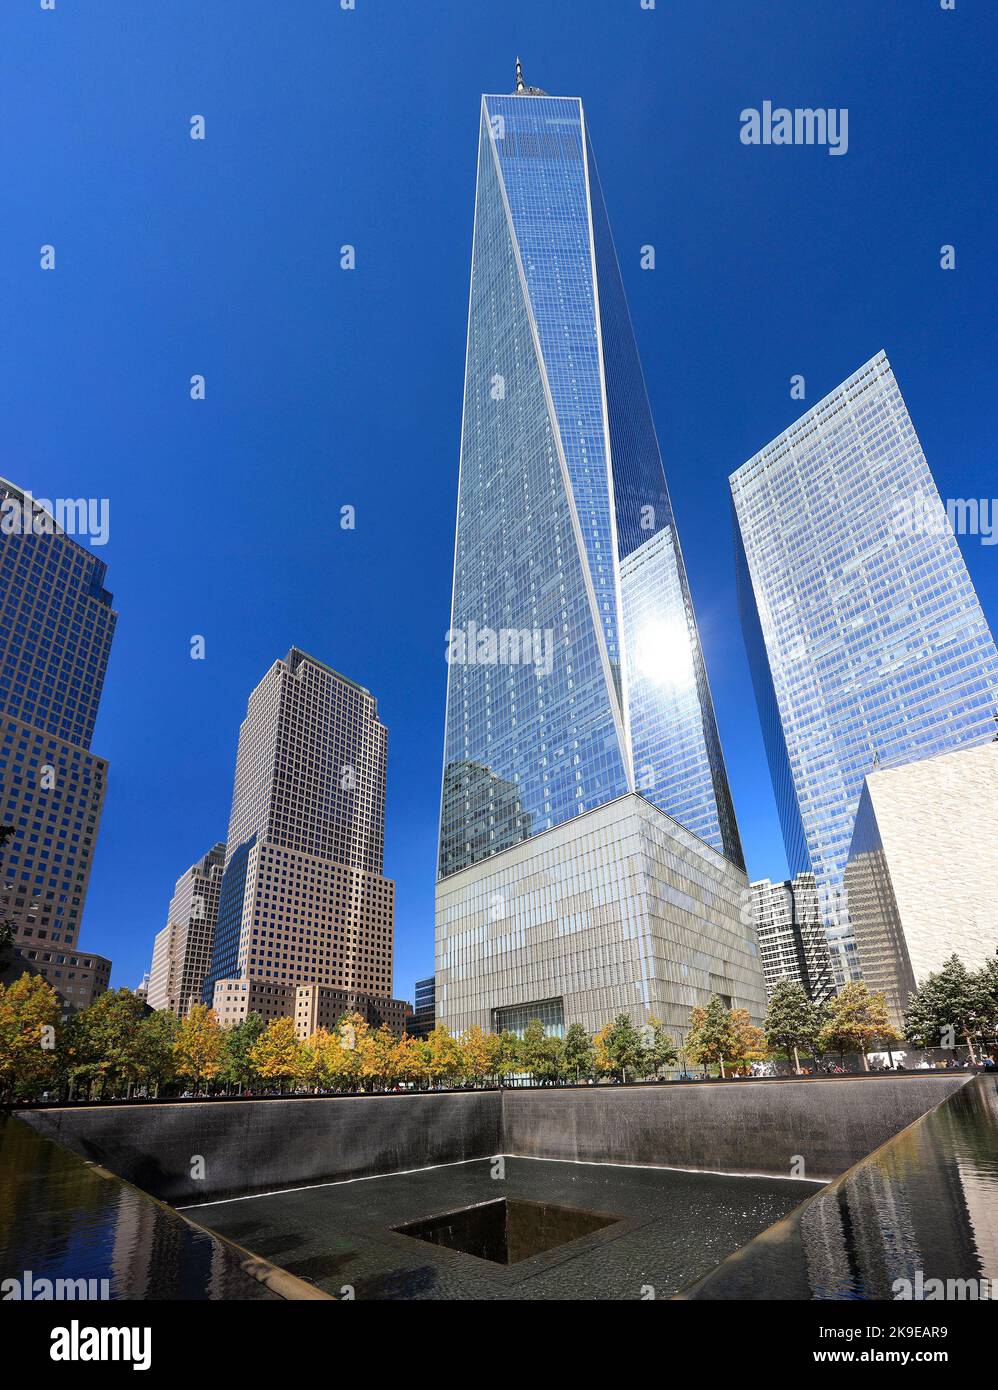 Freedom Tower and Memorial Fountain commemorating the September 11 attacks of 2001, located in lower Manhattan, stands 1,776 feet tall. Stock Photo